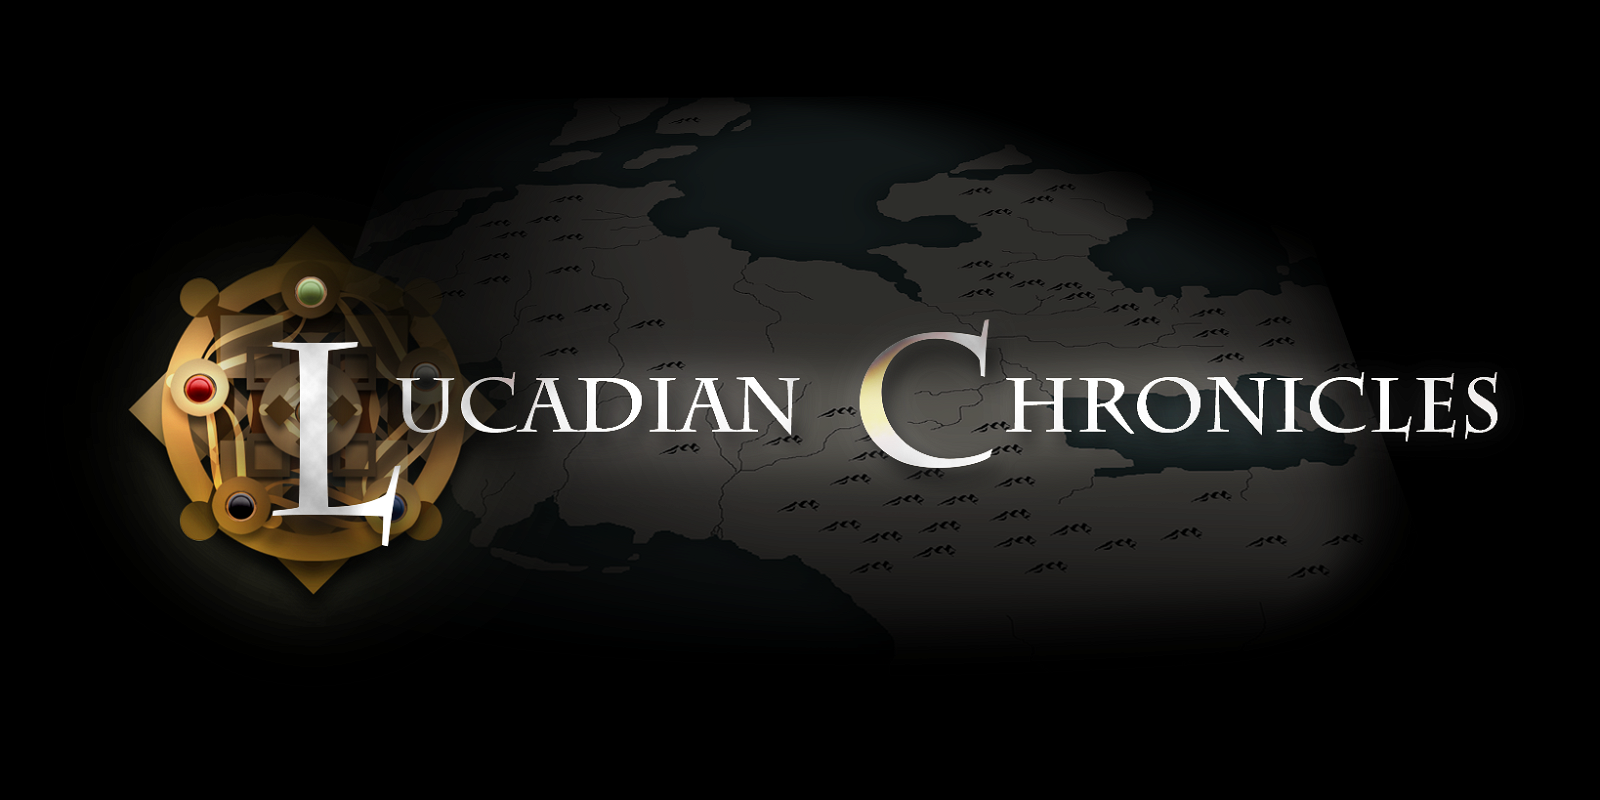 Image of Lucadian Chronicles